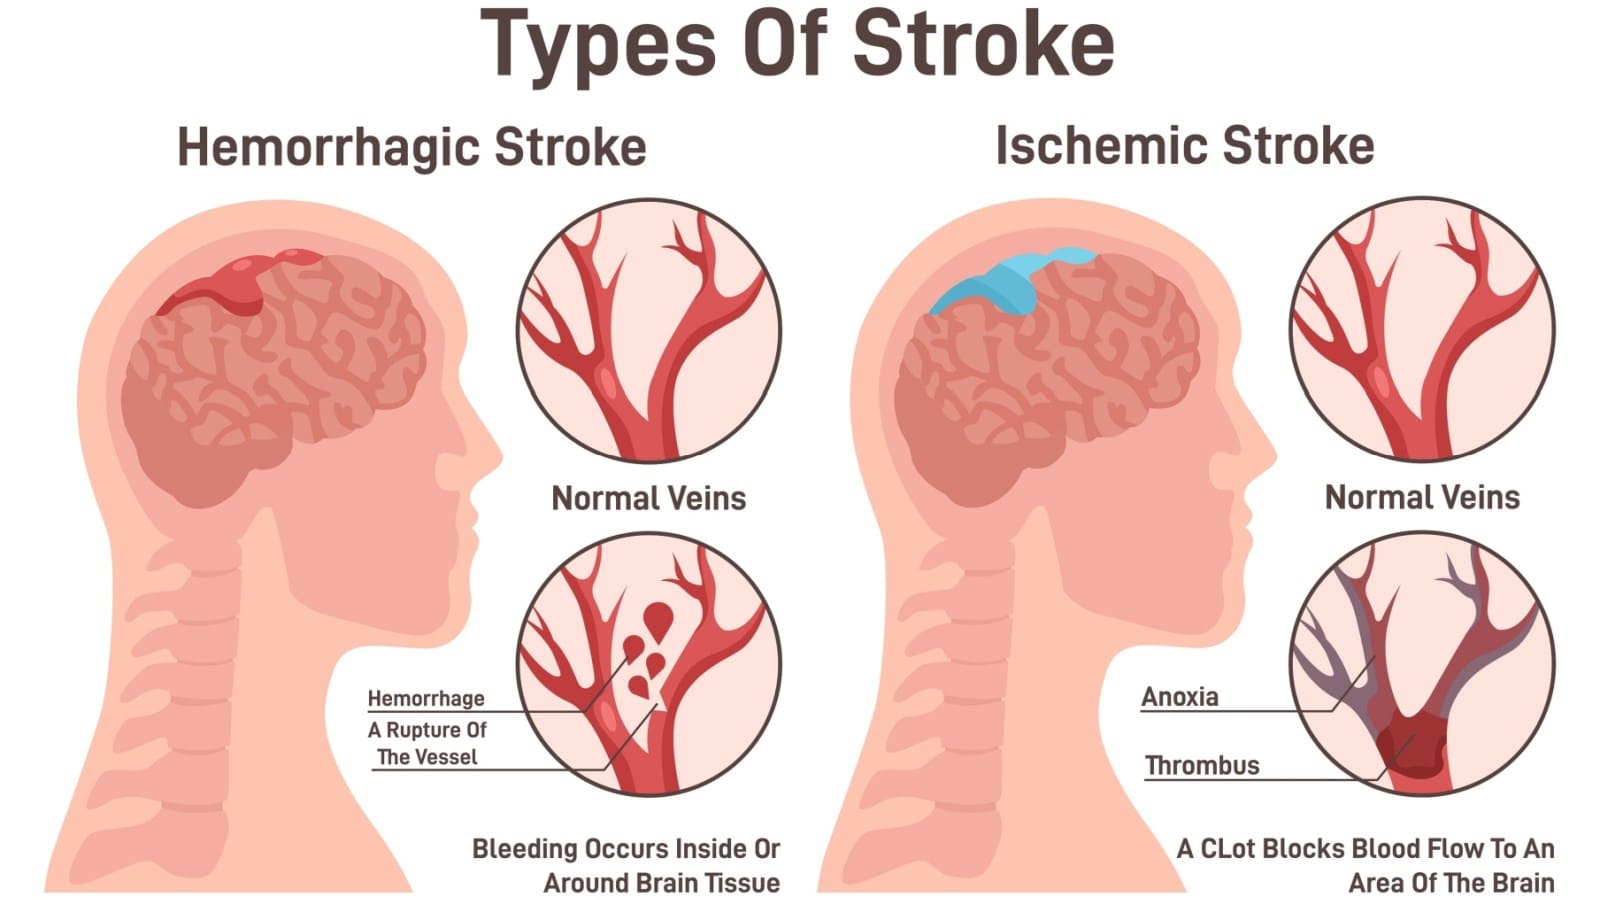 An illustration about the types of stroke